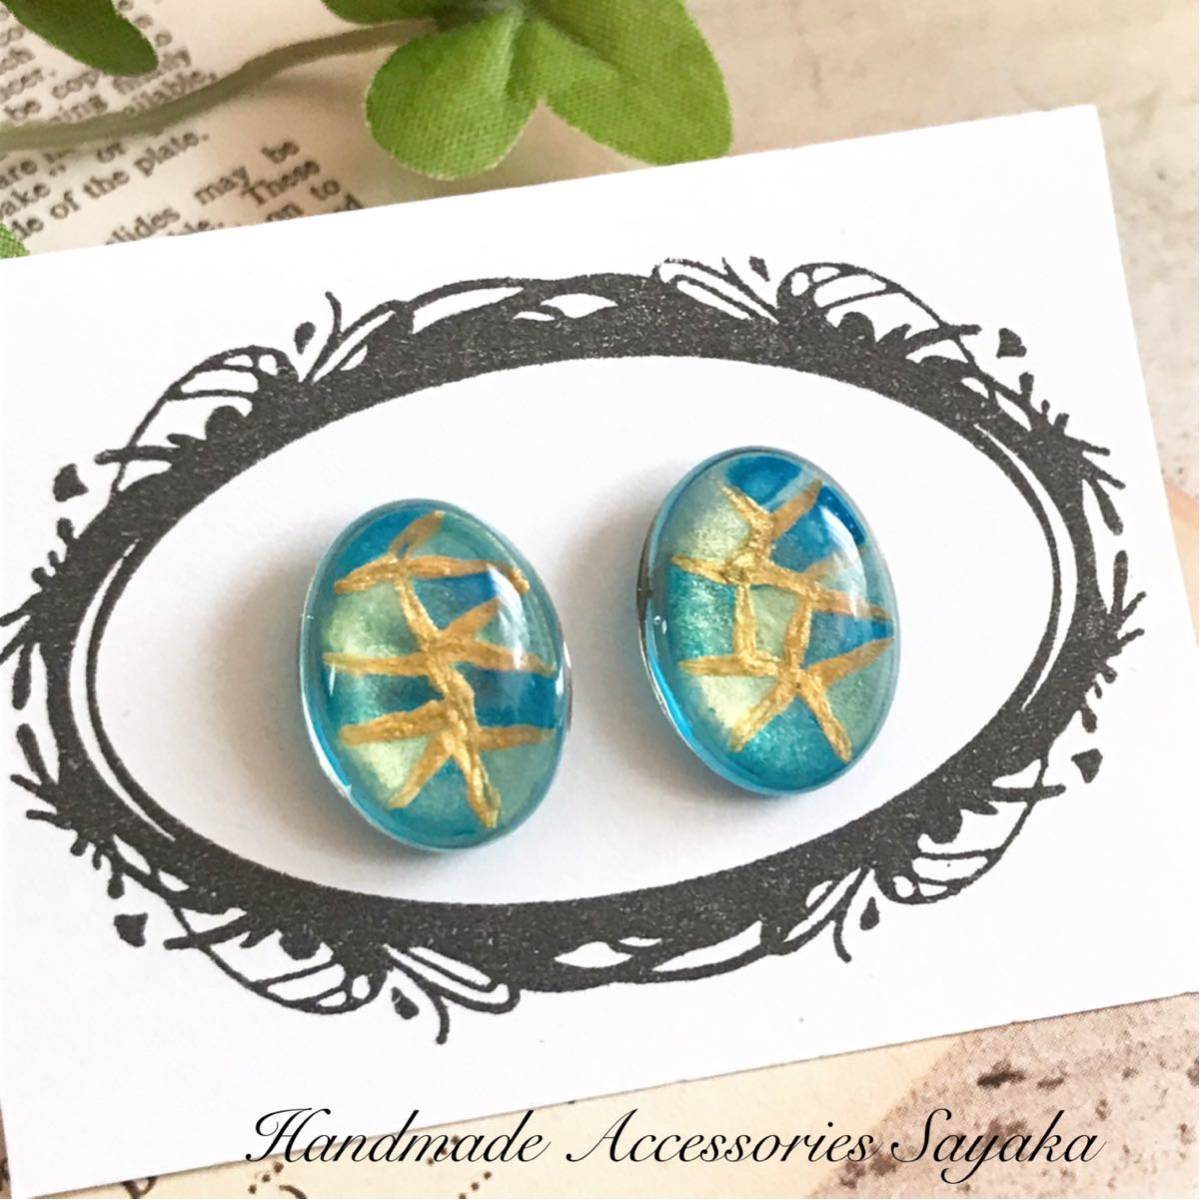 Brand new, instant purchase◆Handmade stud earrings, resin blue green, stained glass style, hand-painted, sparkling, beautiful, handmade accessories, earrings, beads, glass, others